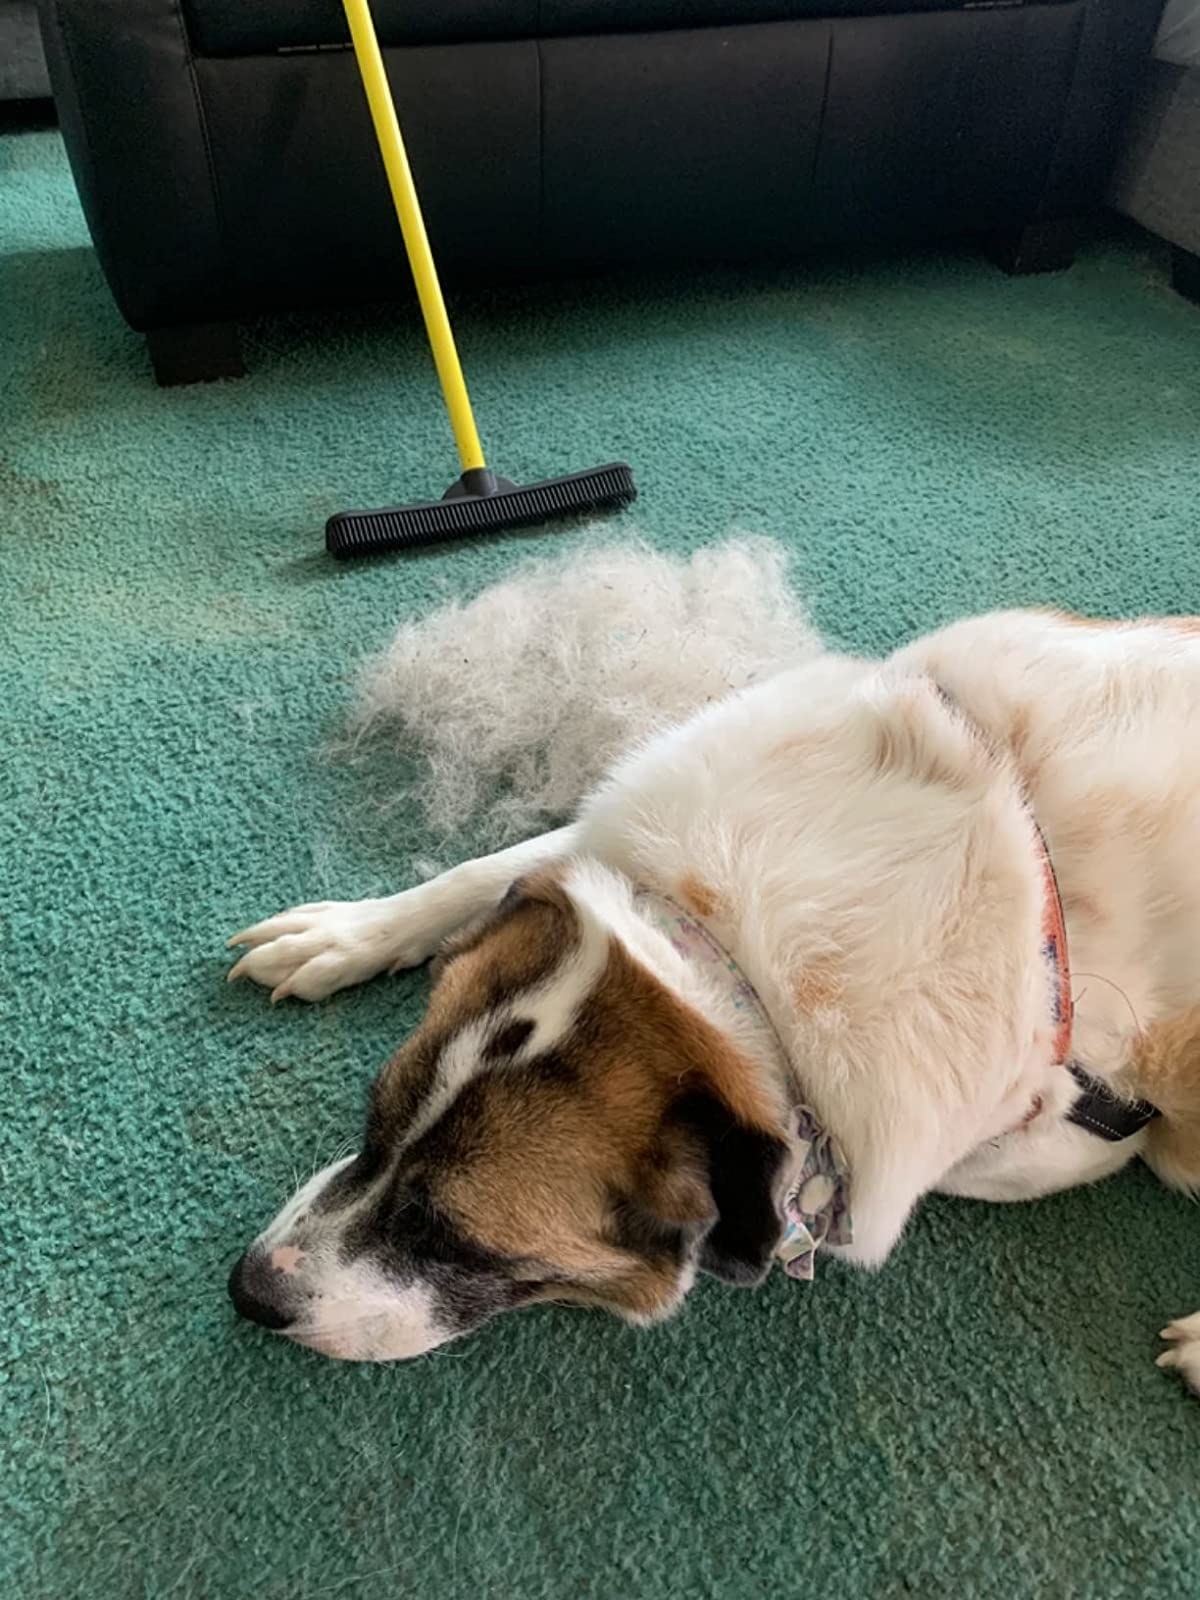 A dog laying on green carpet next to a pile of fur and a broom